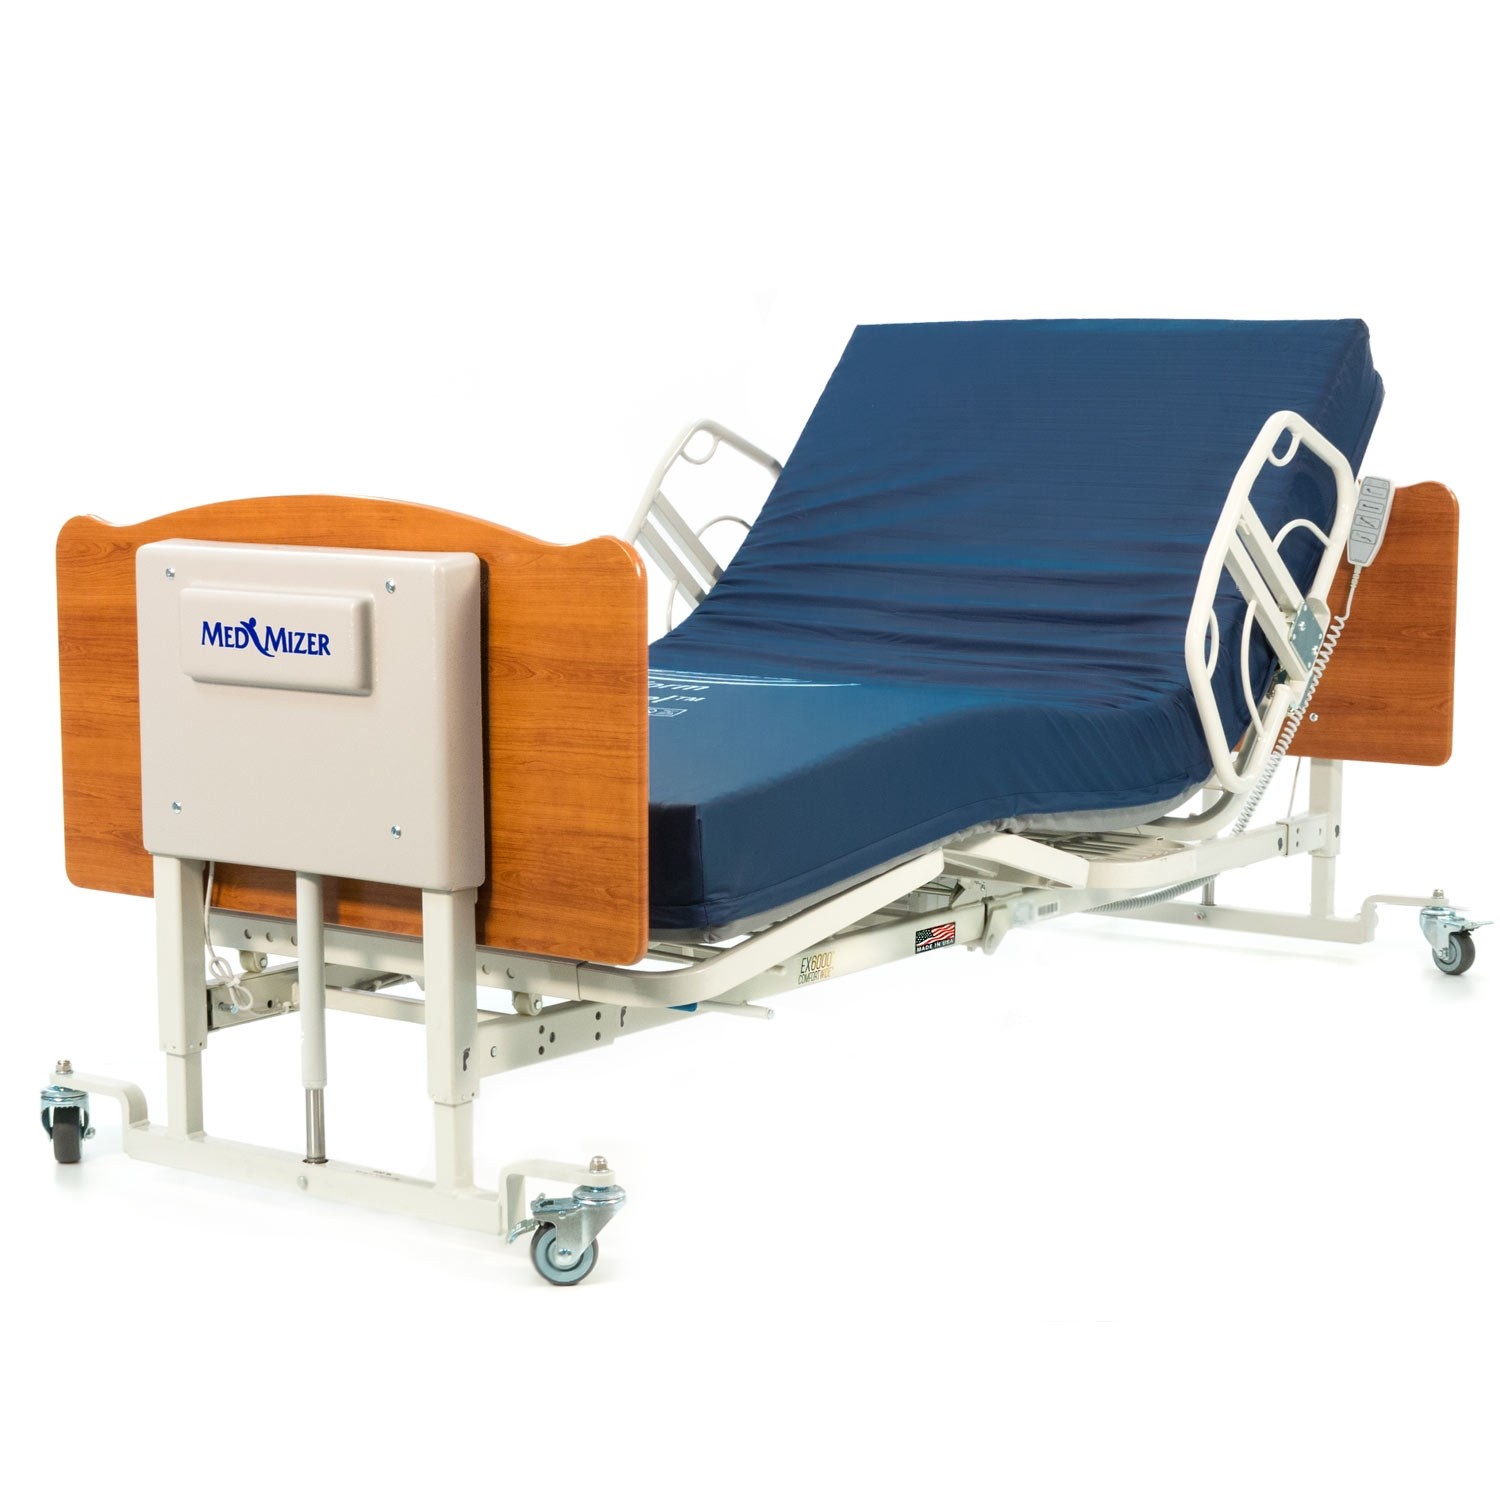 Online Bed in USA